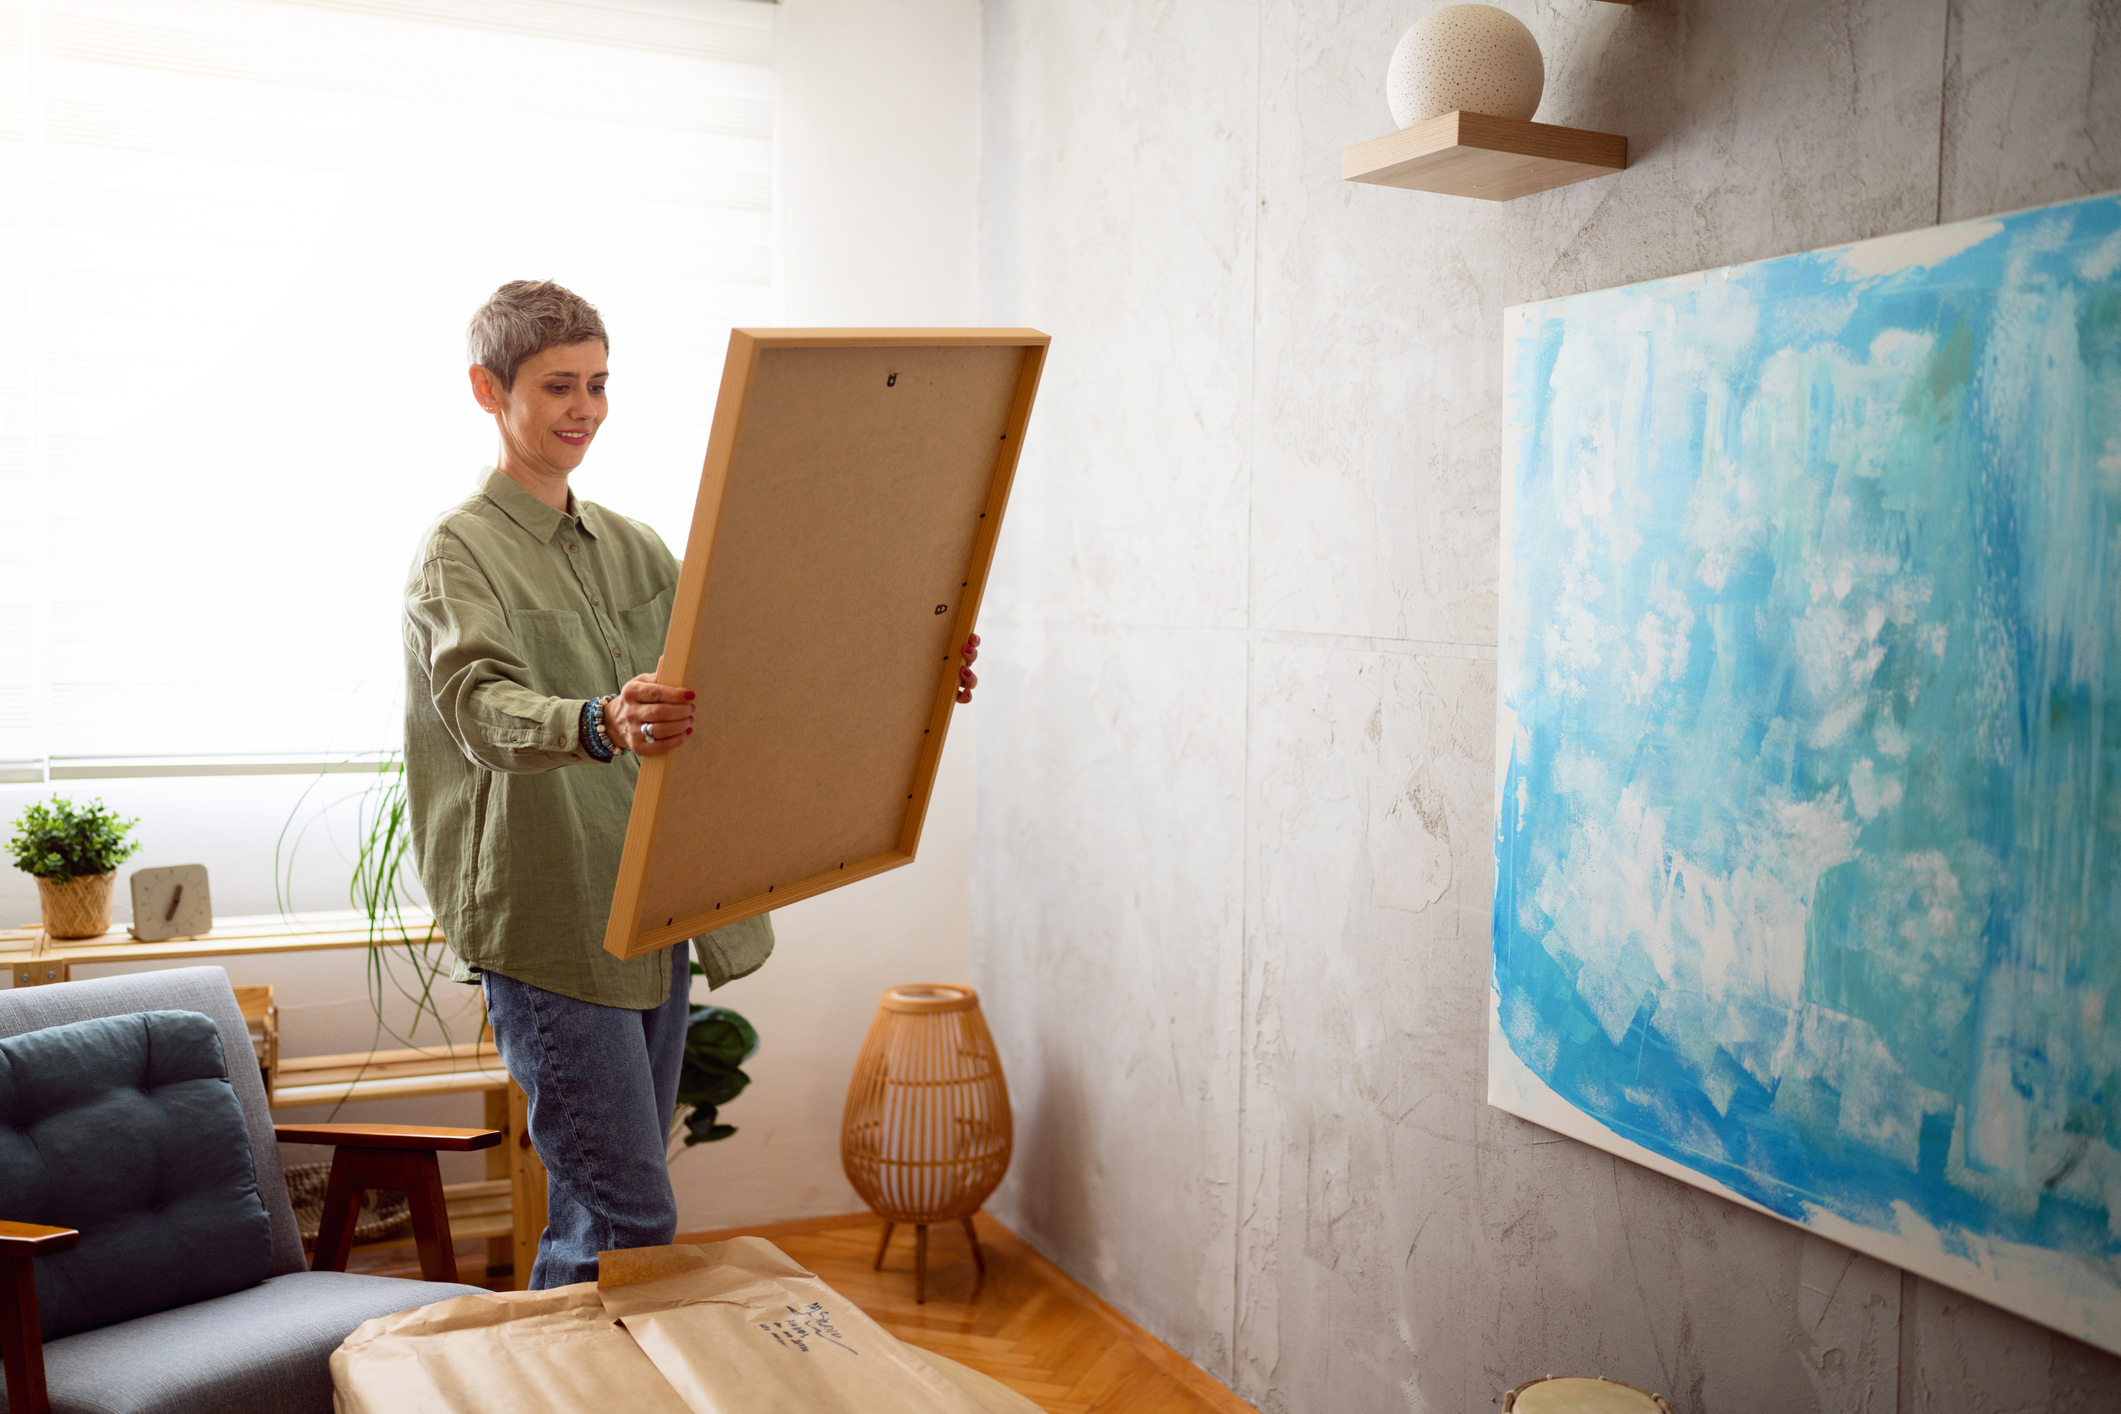 Person hanging a picture frame in a room with furniture and a large blue painting on the wall